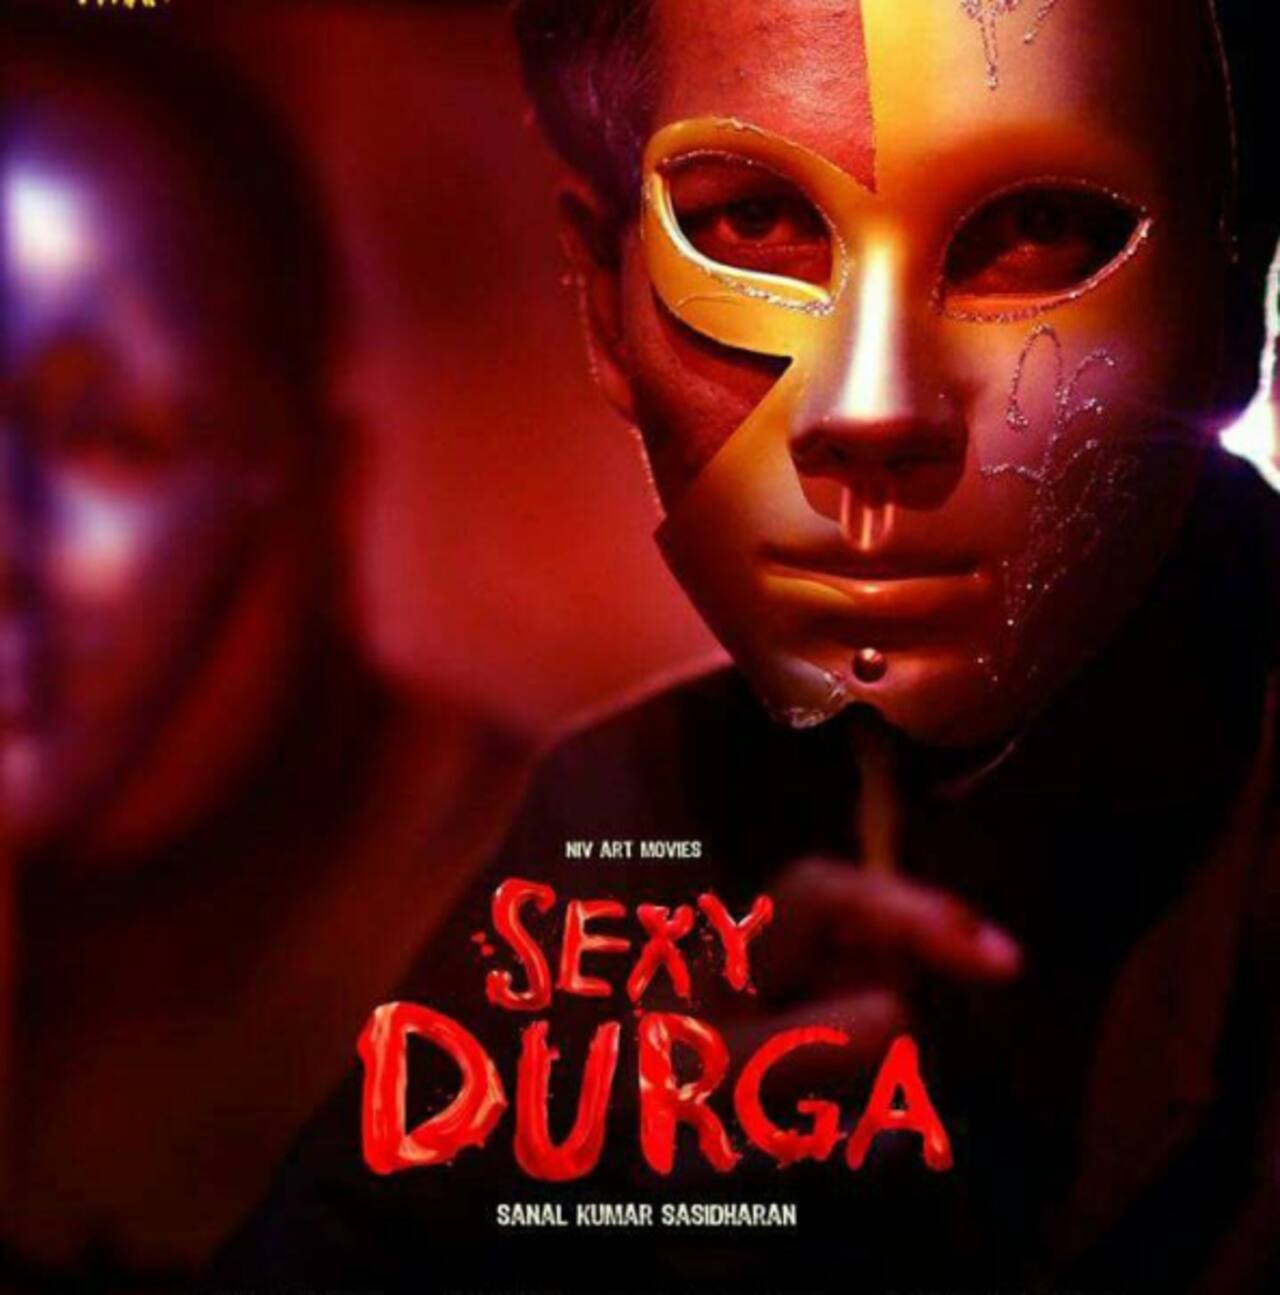 All you need to know about Sexy Durga, the Malayalam film that was dropped from IFFI